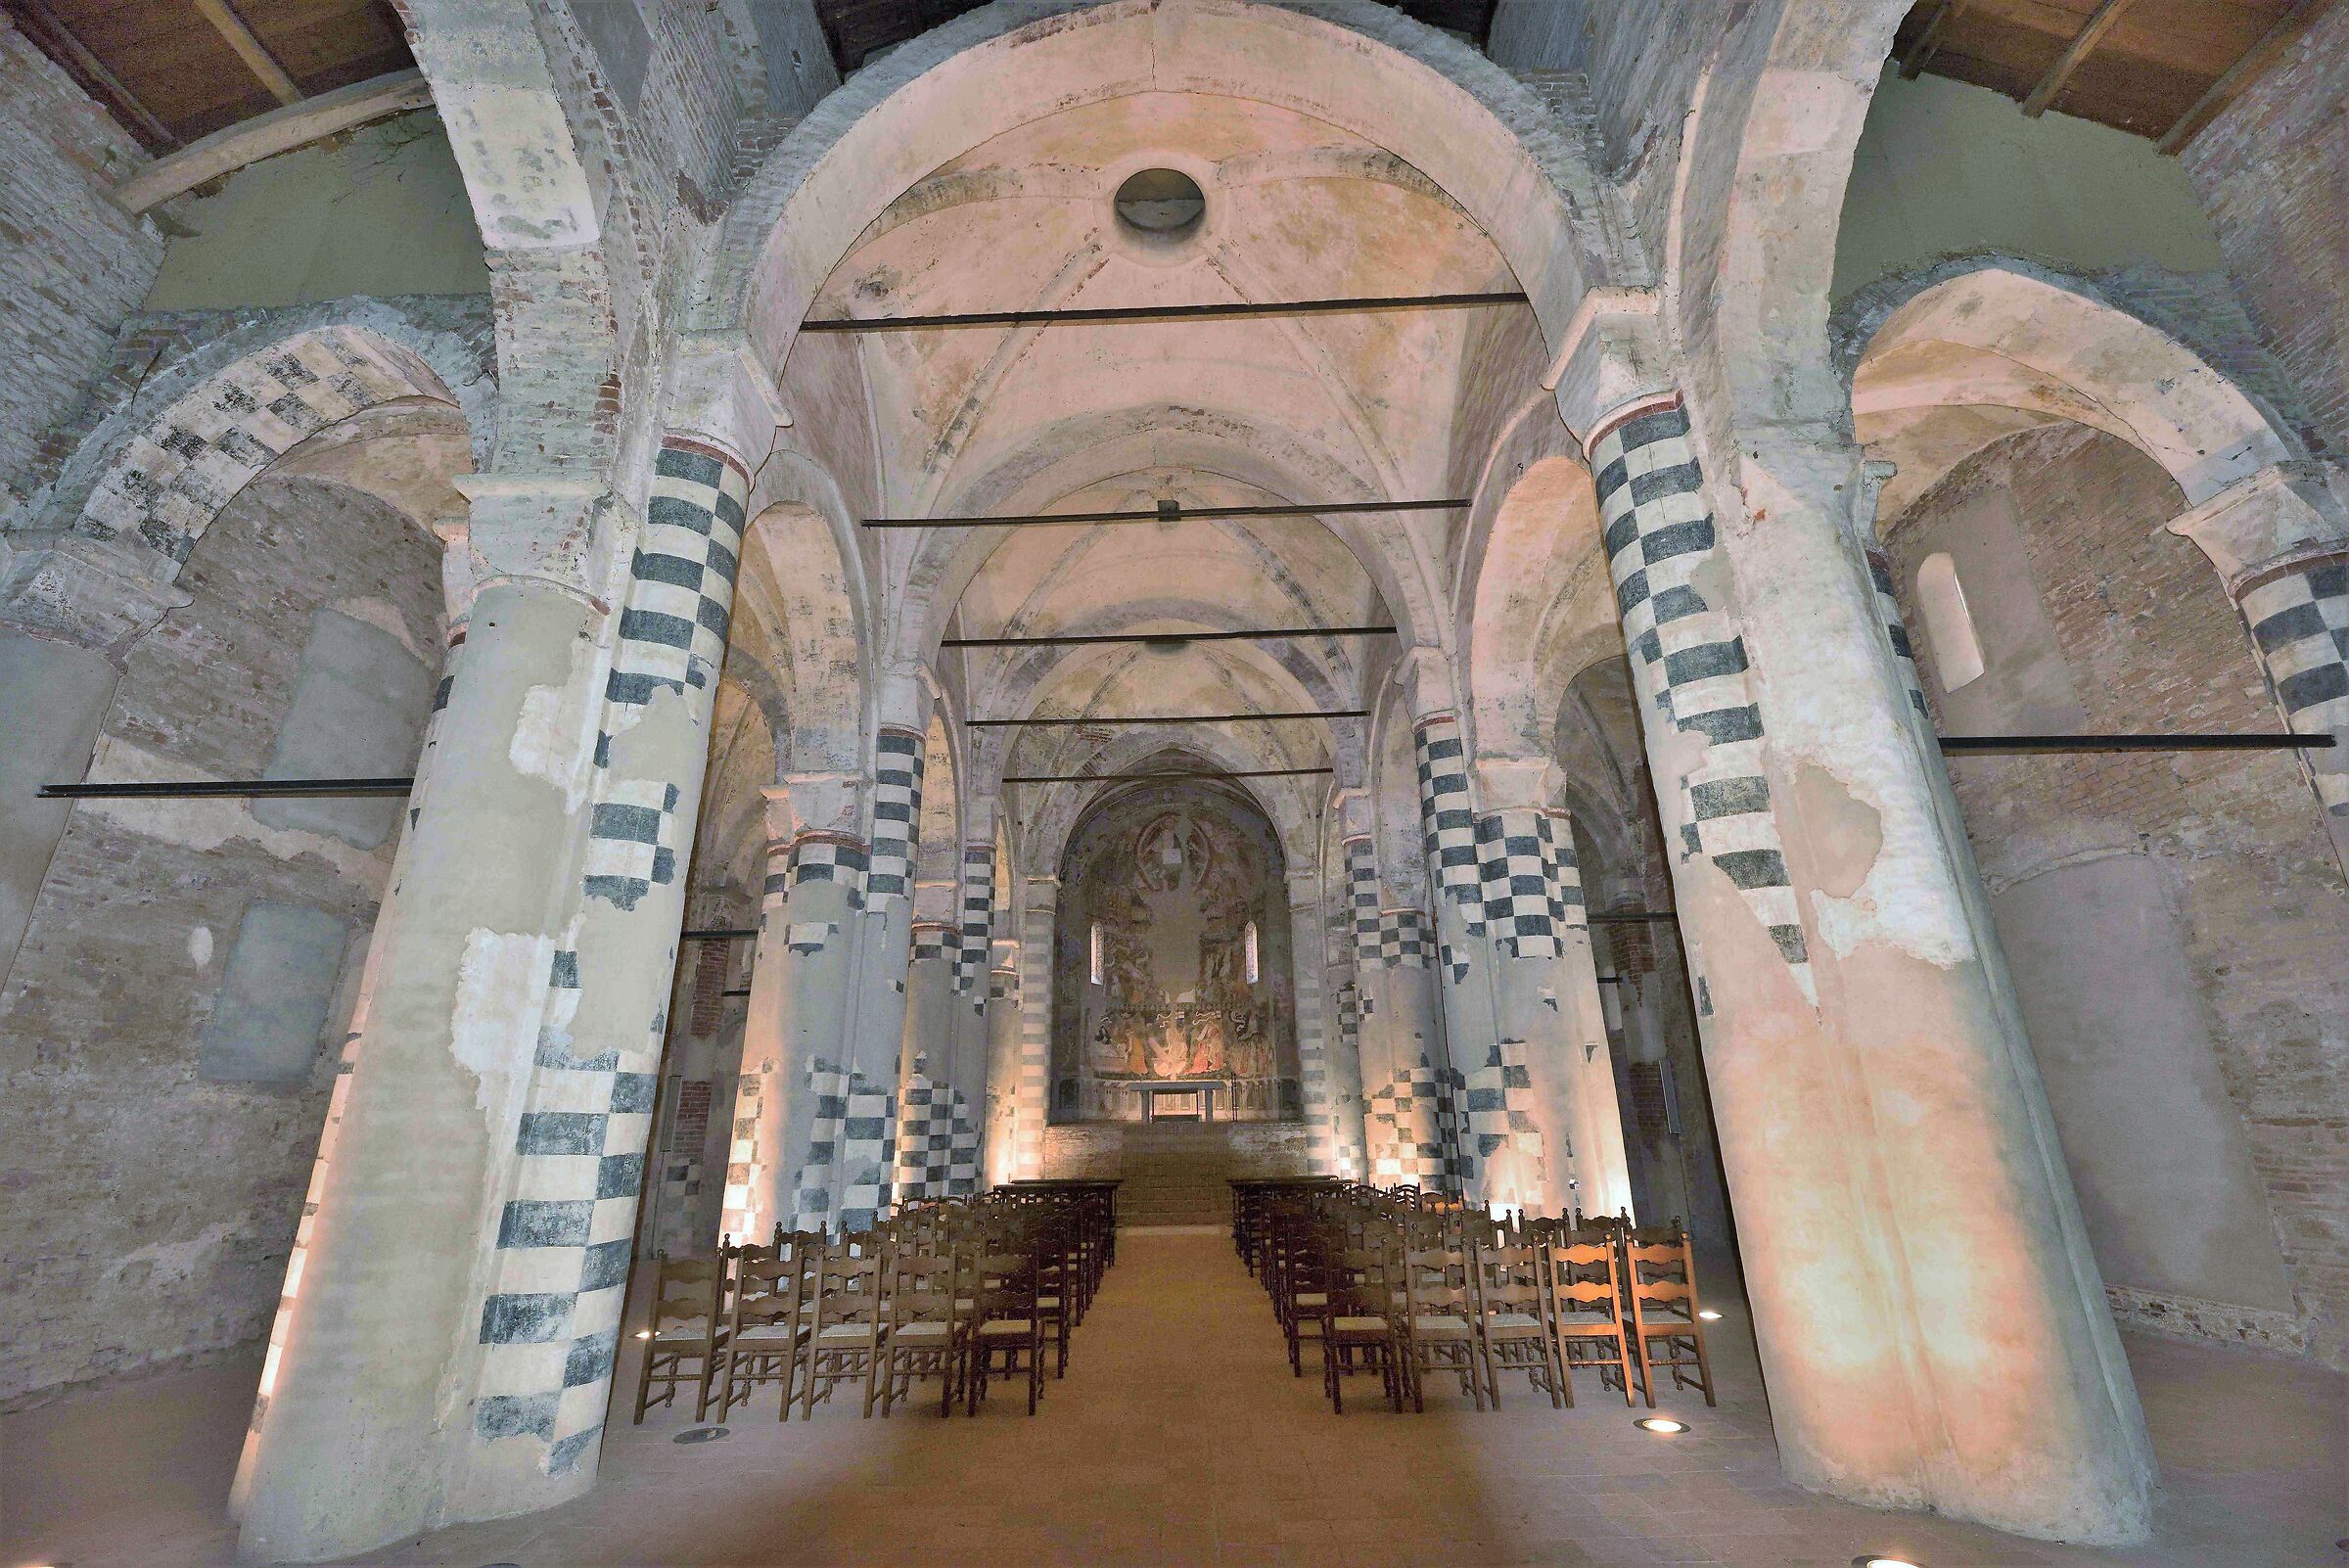 The interior of the abbey...